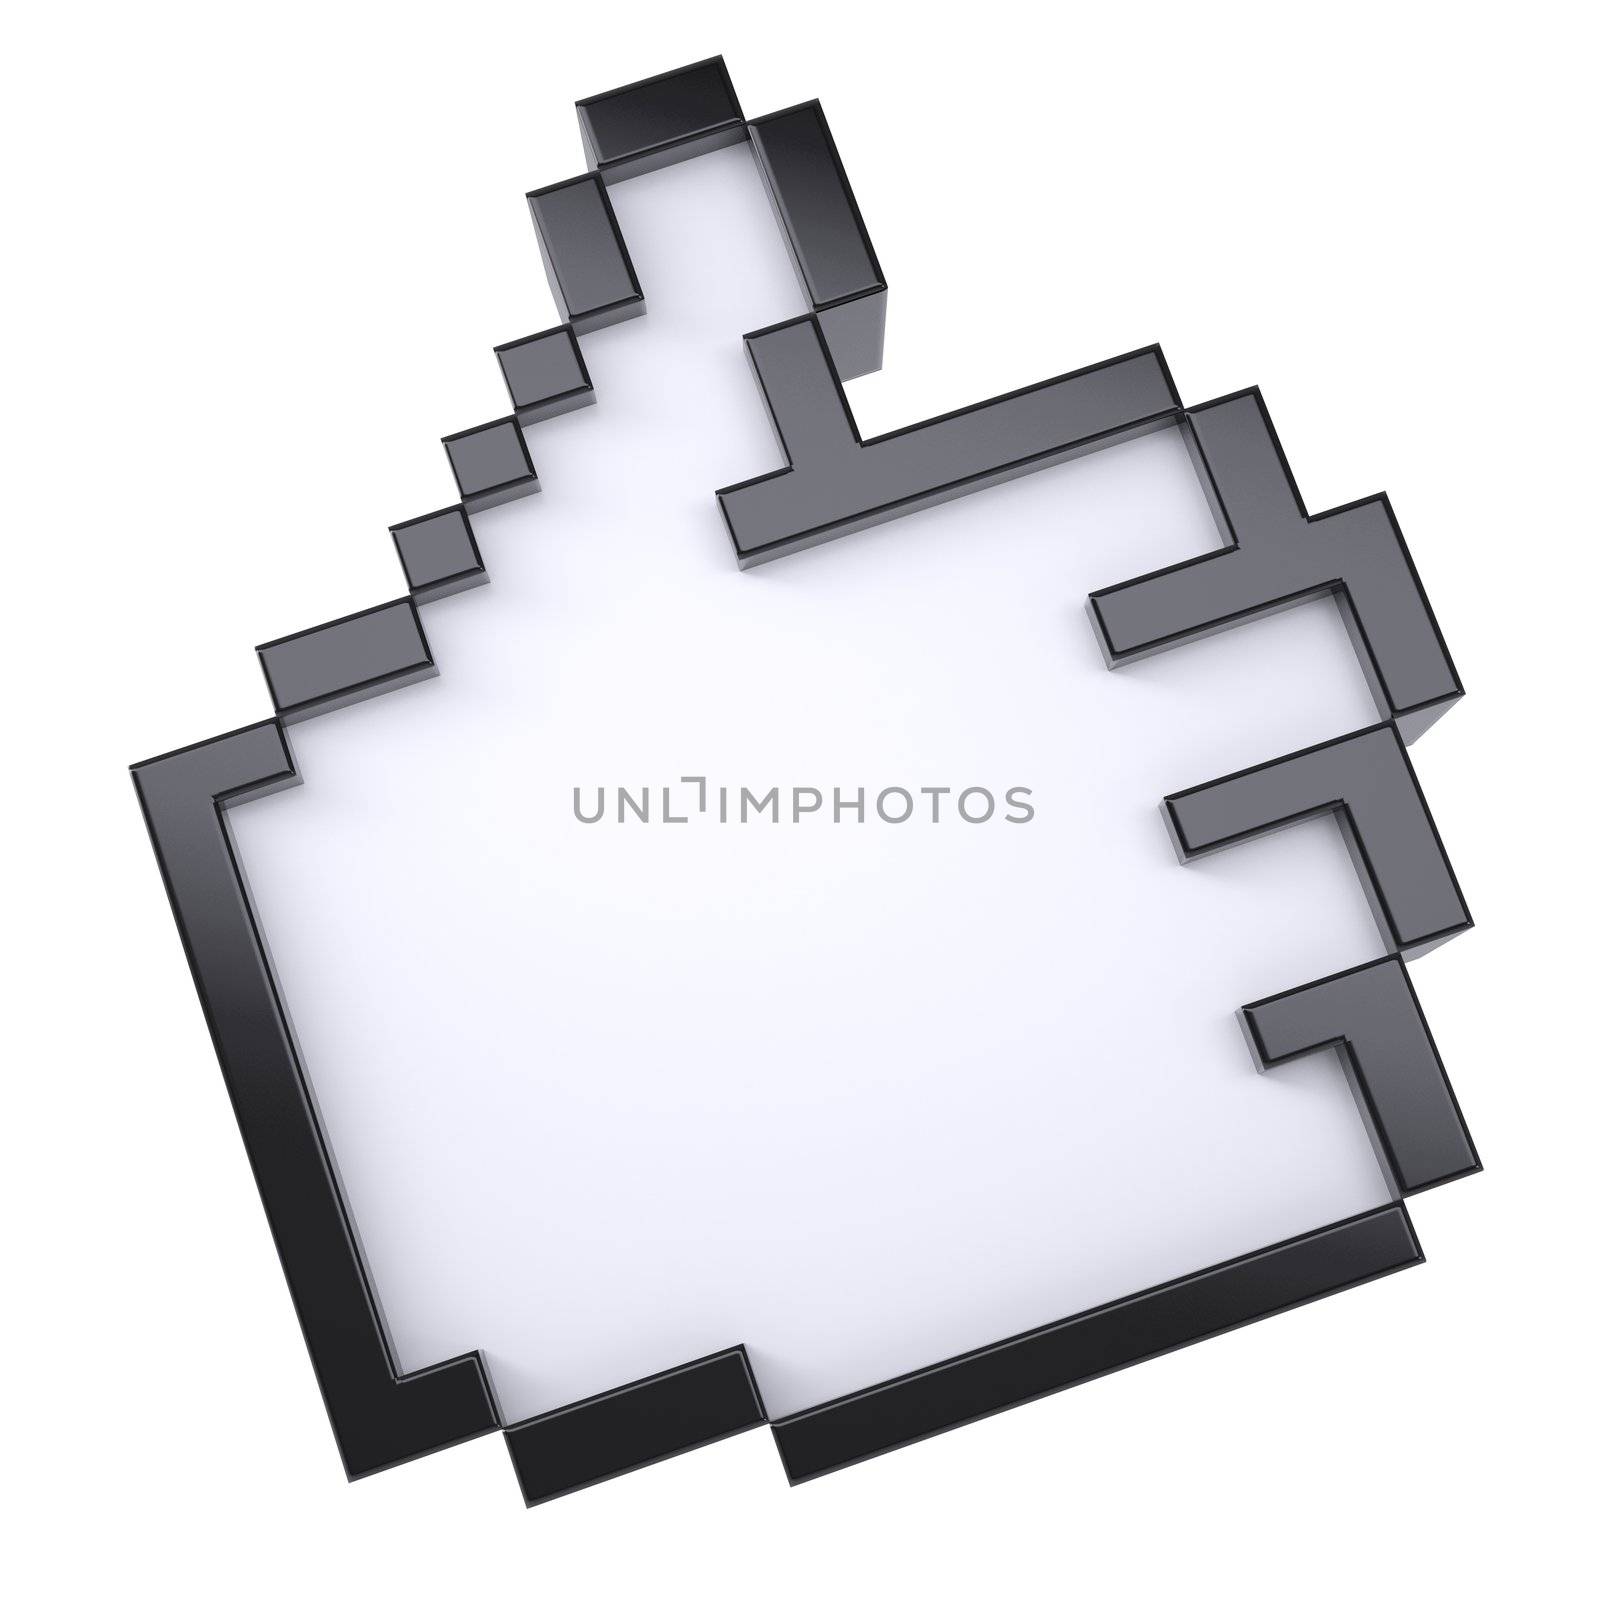 Pixel thumbs up. Isolated render on white background